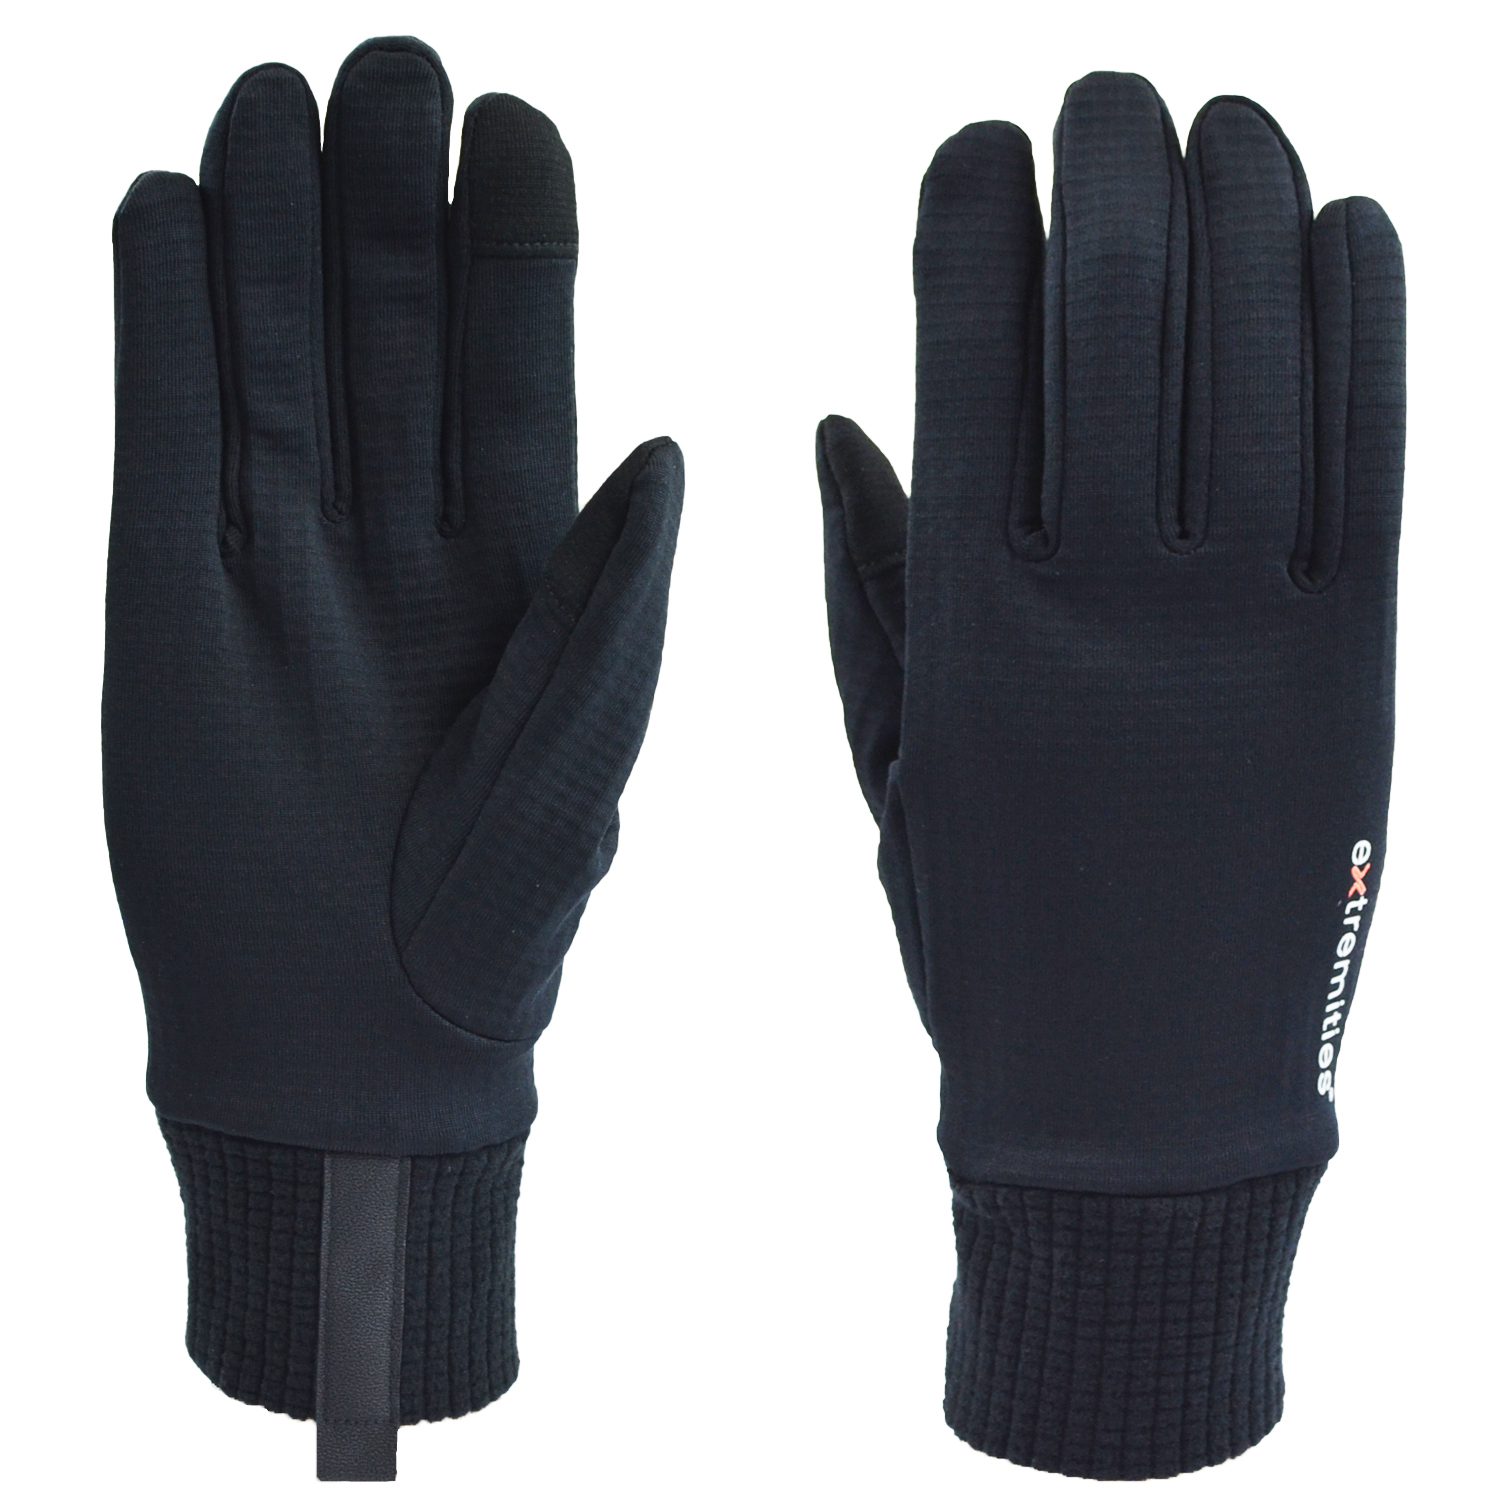 Flux Liner Glove | Gloves and Mitts | Extremities